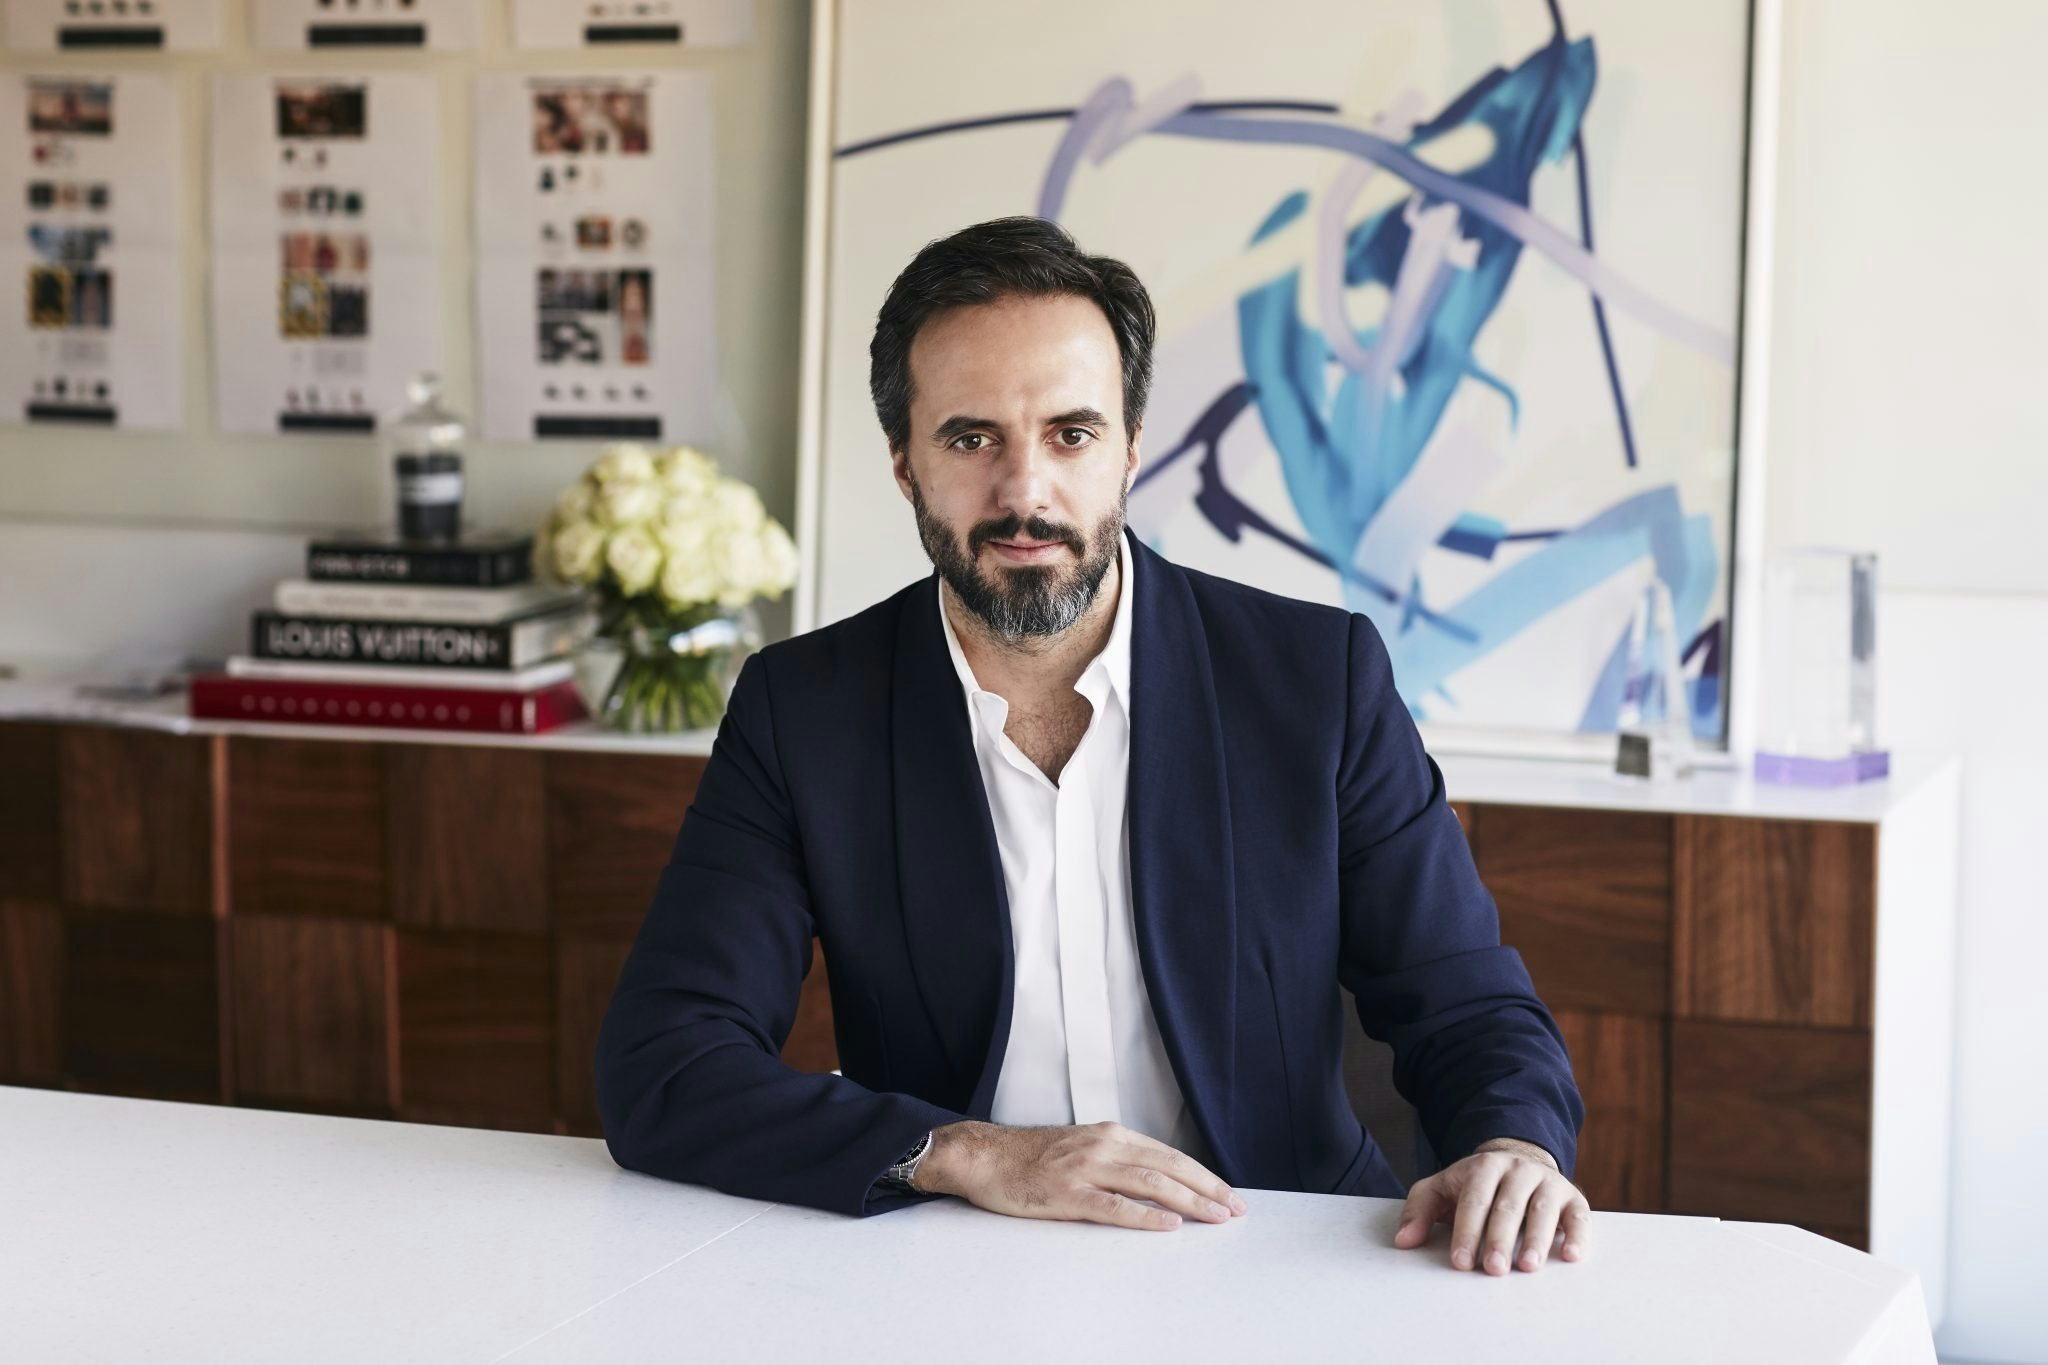 José Neves, Founder and CEO at Farfetch. Image courtesy of Farfetch